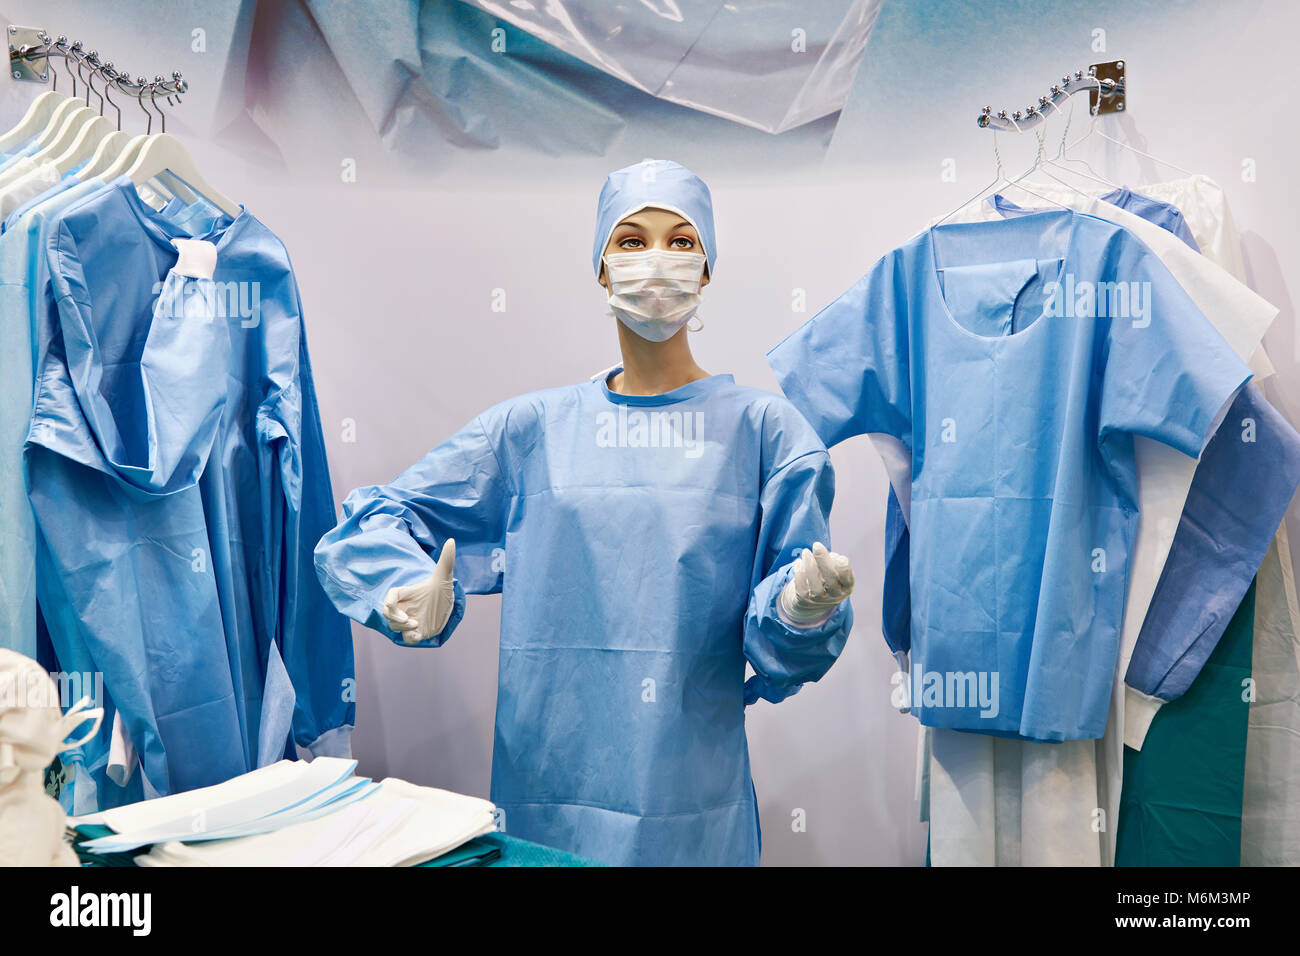 Mannequin in surgical gown Stock Photo